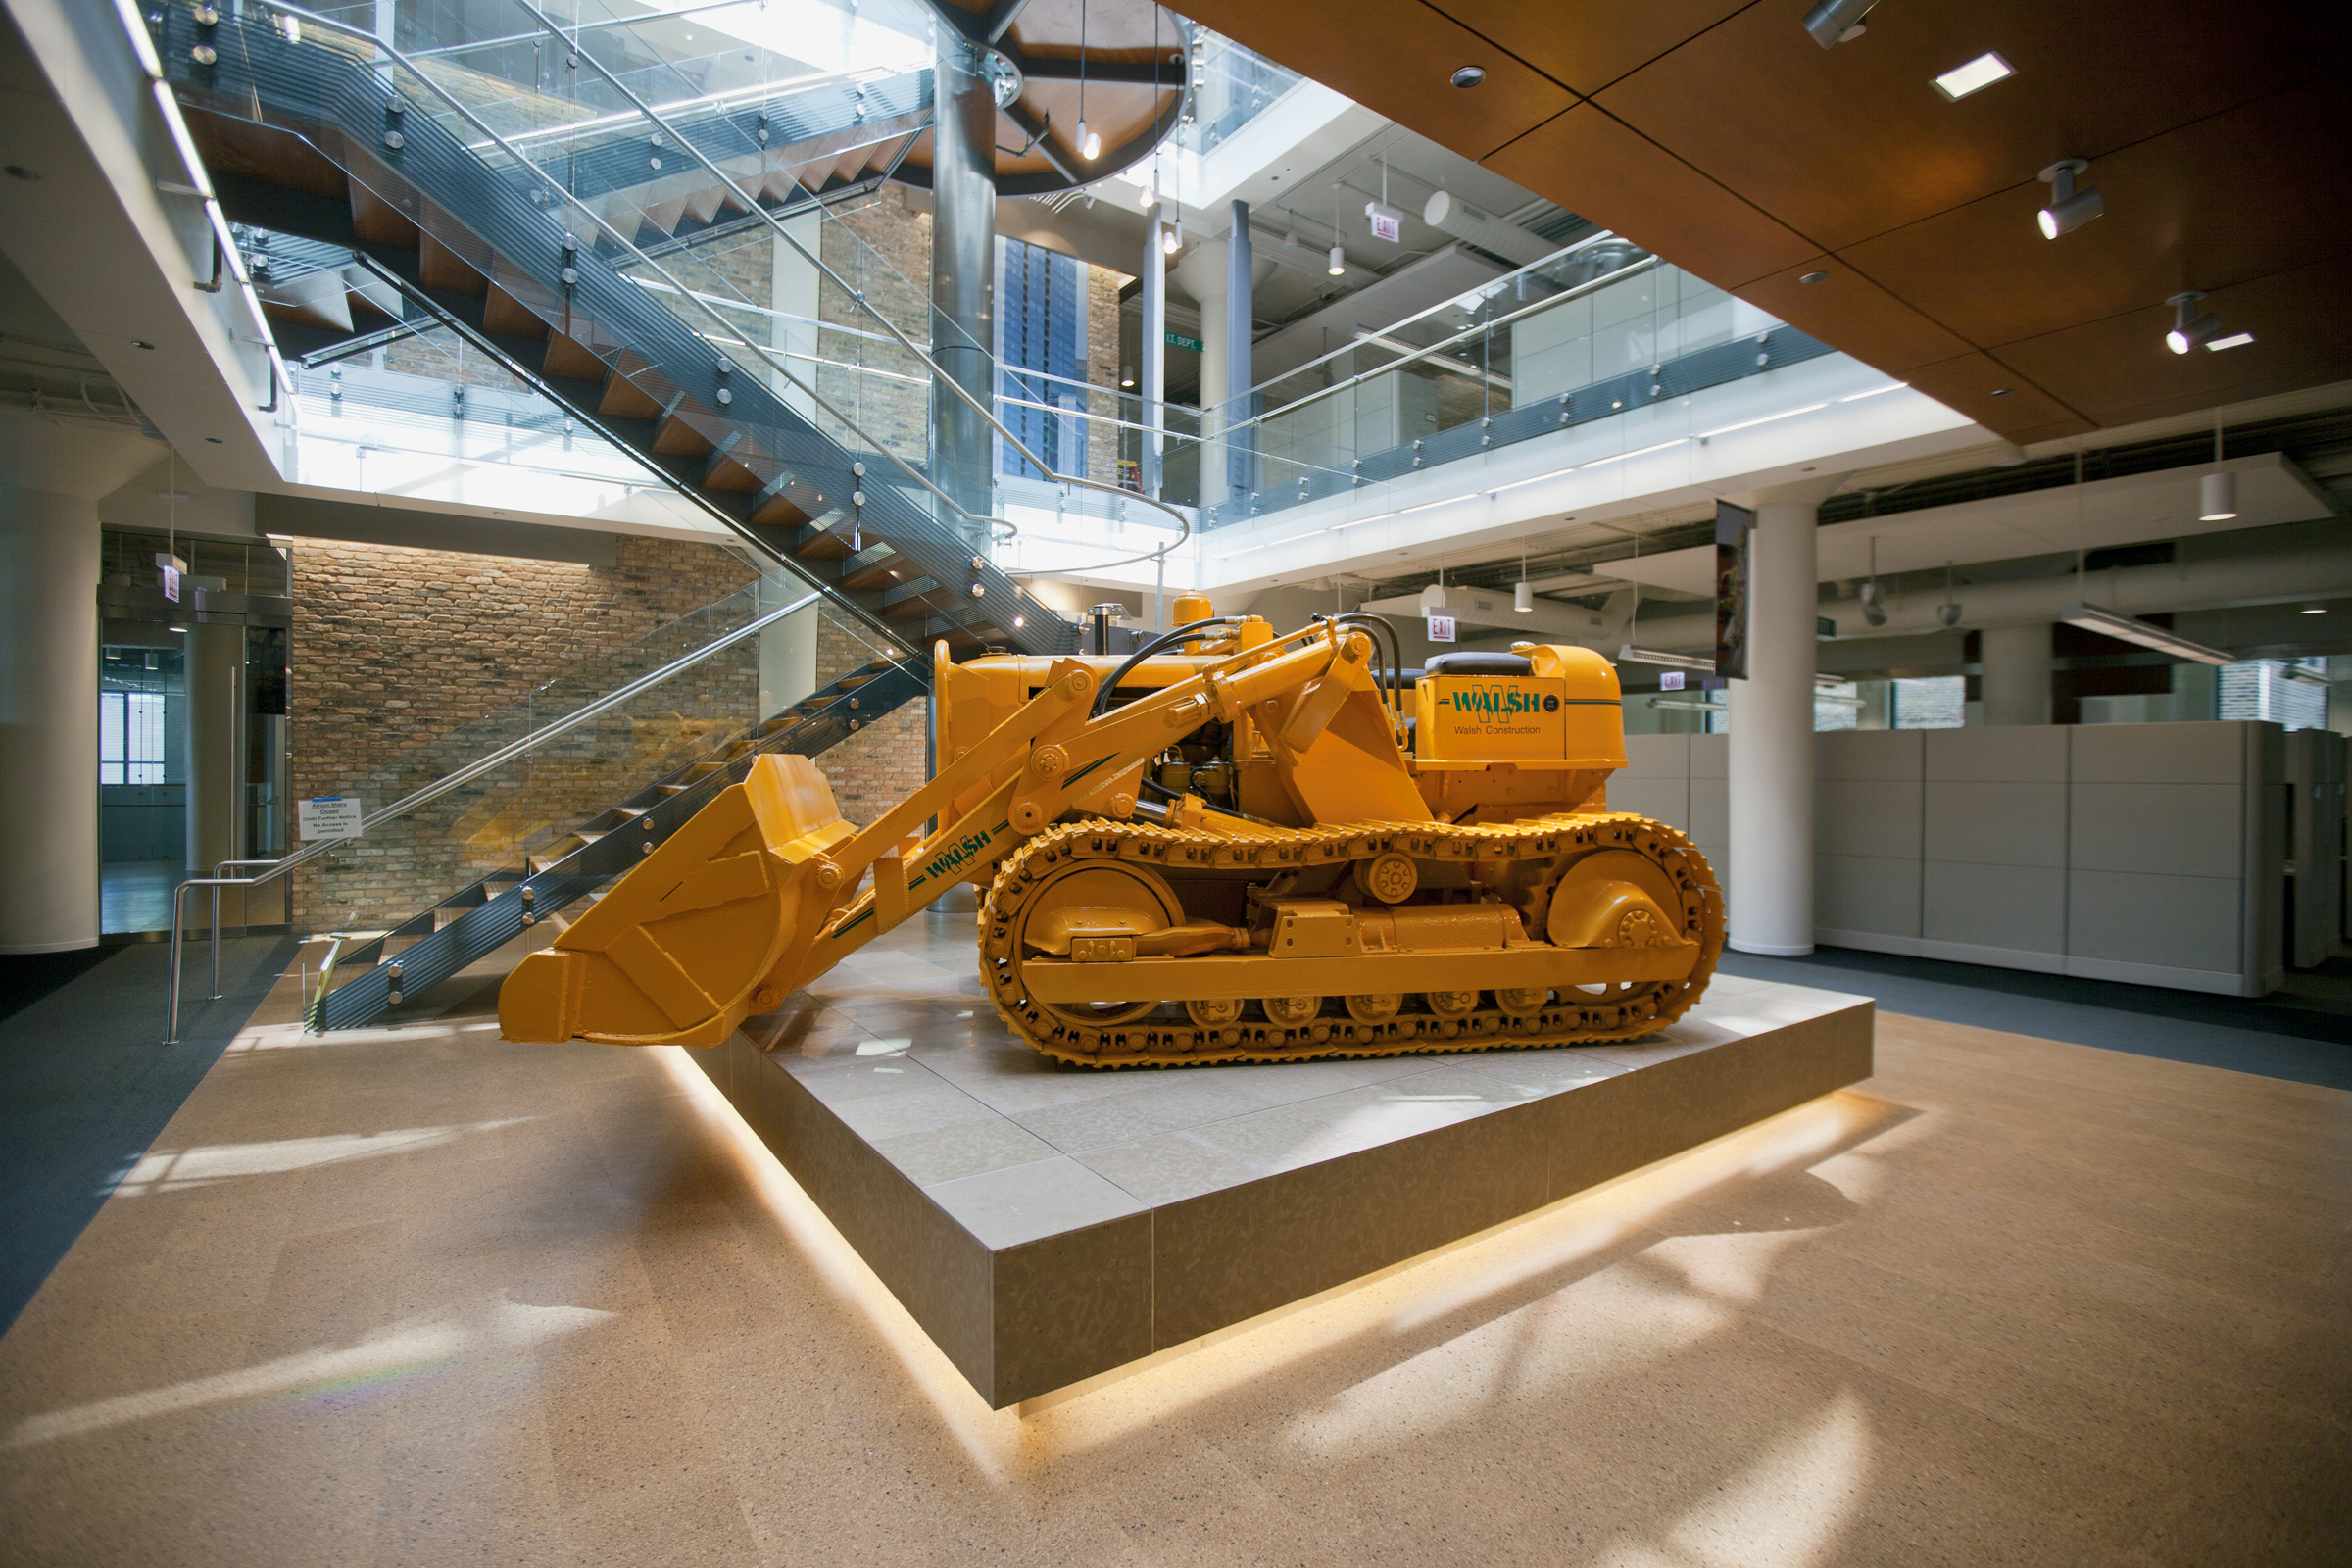 A 1953 Allis-Chalmers bulldozer in the central atrium of the Walsh Training and 